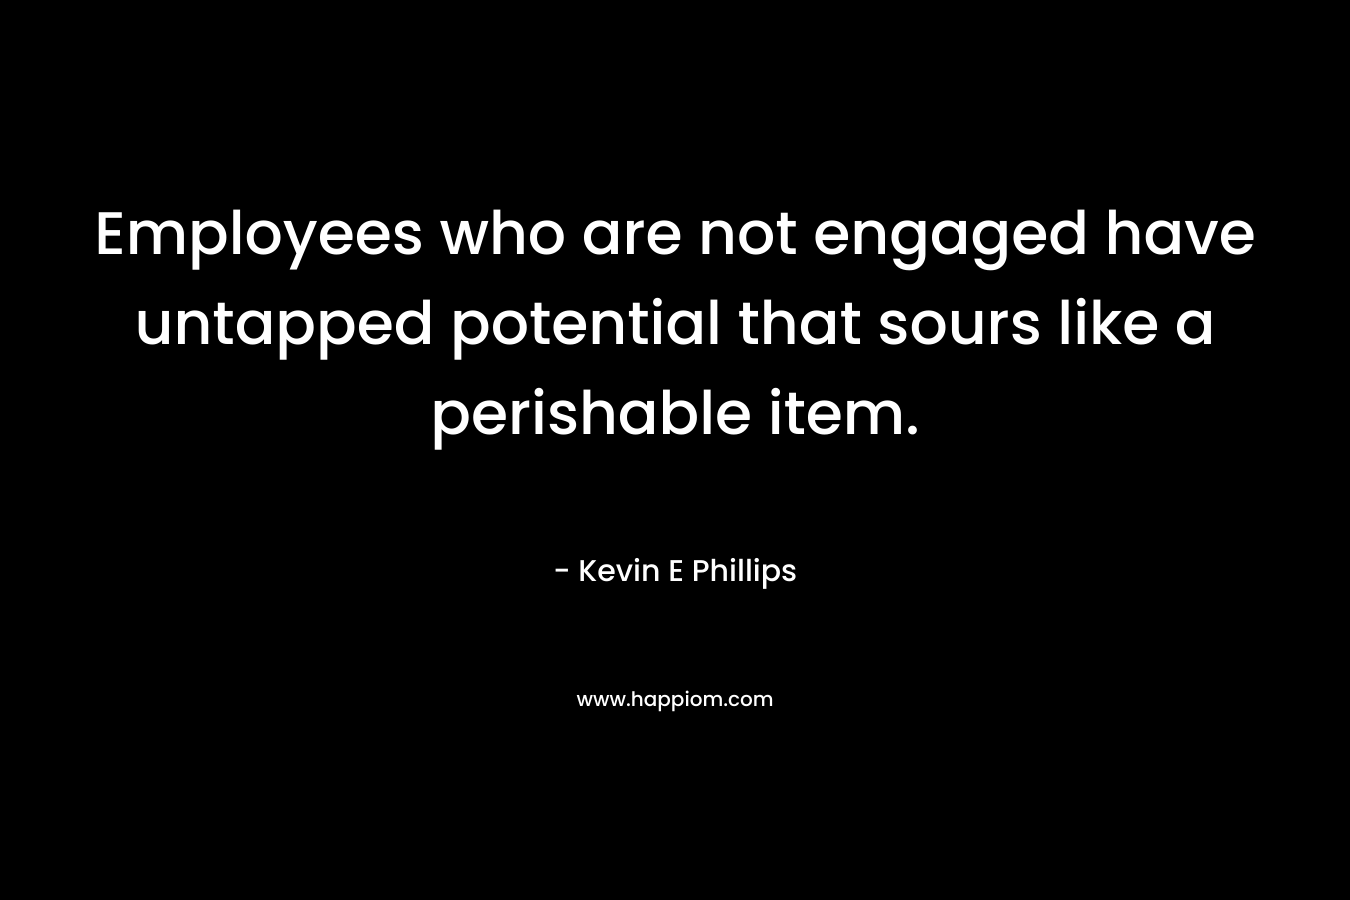 Employees who are not engaged have untapped potential that sours like a perishable item. – Kevin E Phillips